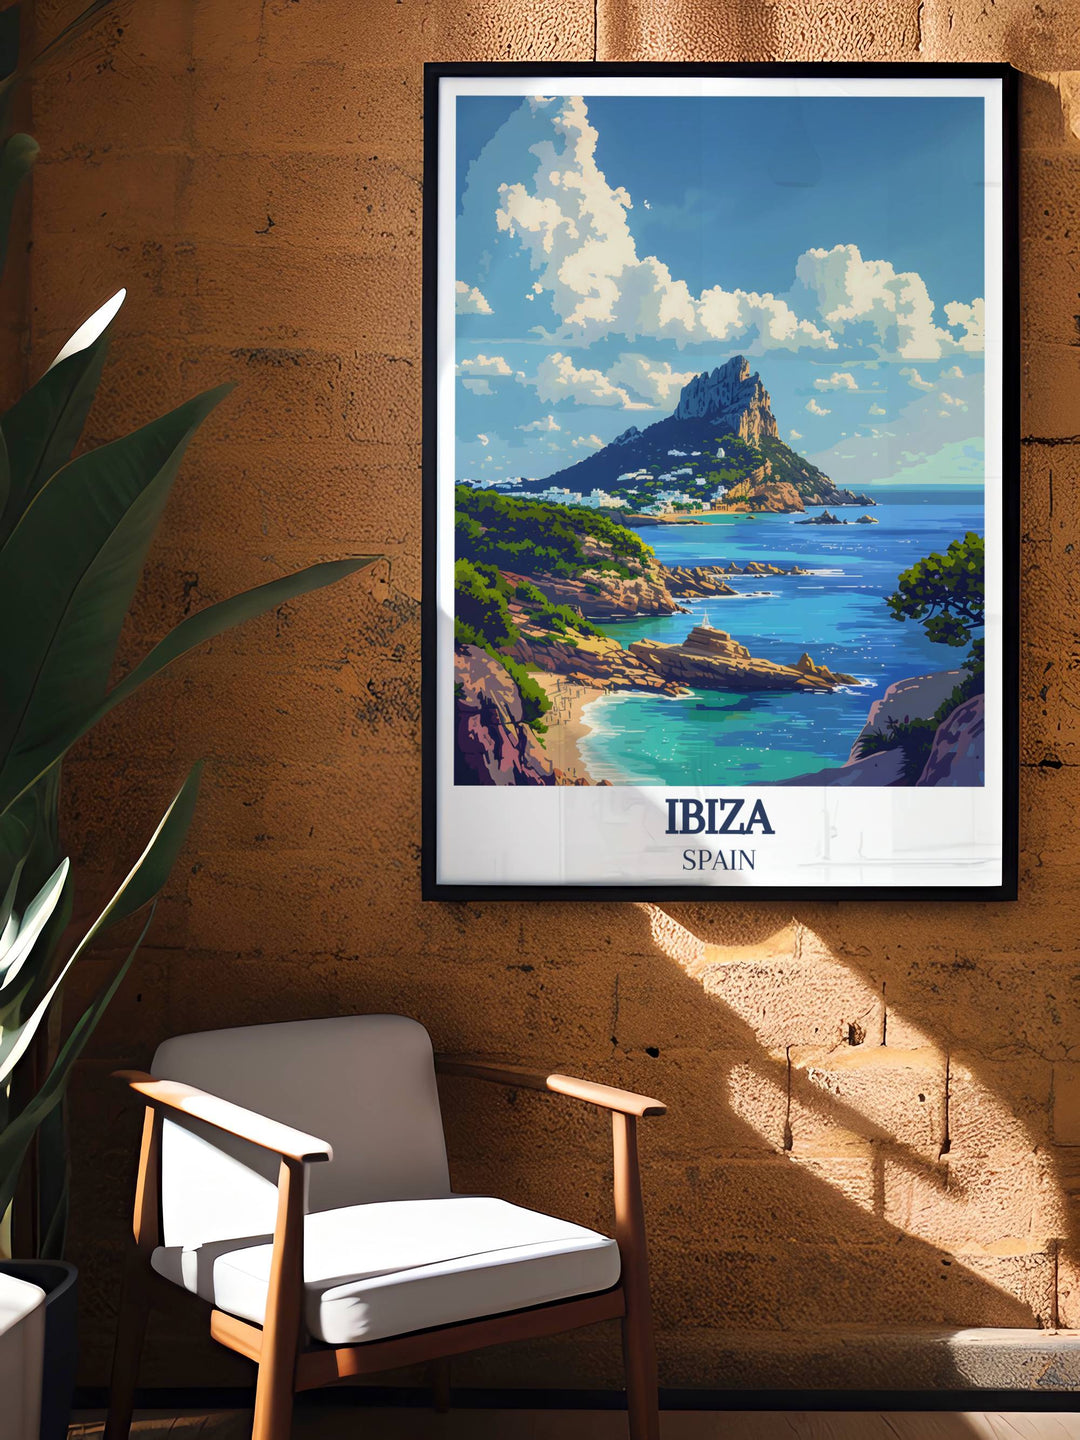 Dance Music Art poster showcasing the dynamic O Beach Day Club and the serene Es Vedra Digital perfect for adding a touch of Ibizas lively nightlife and mystical charm to your wall art collection